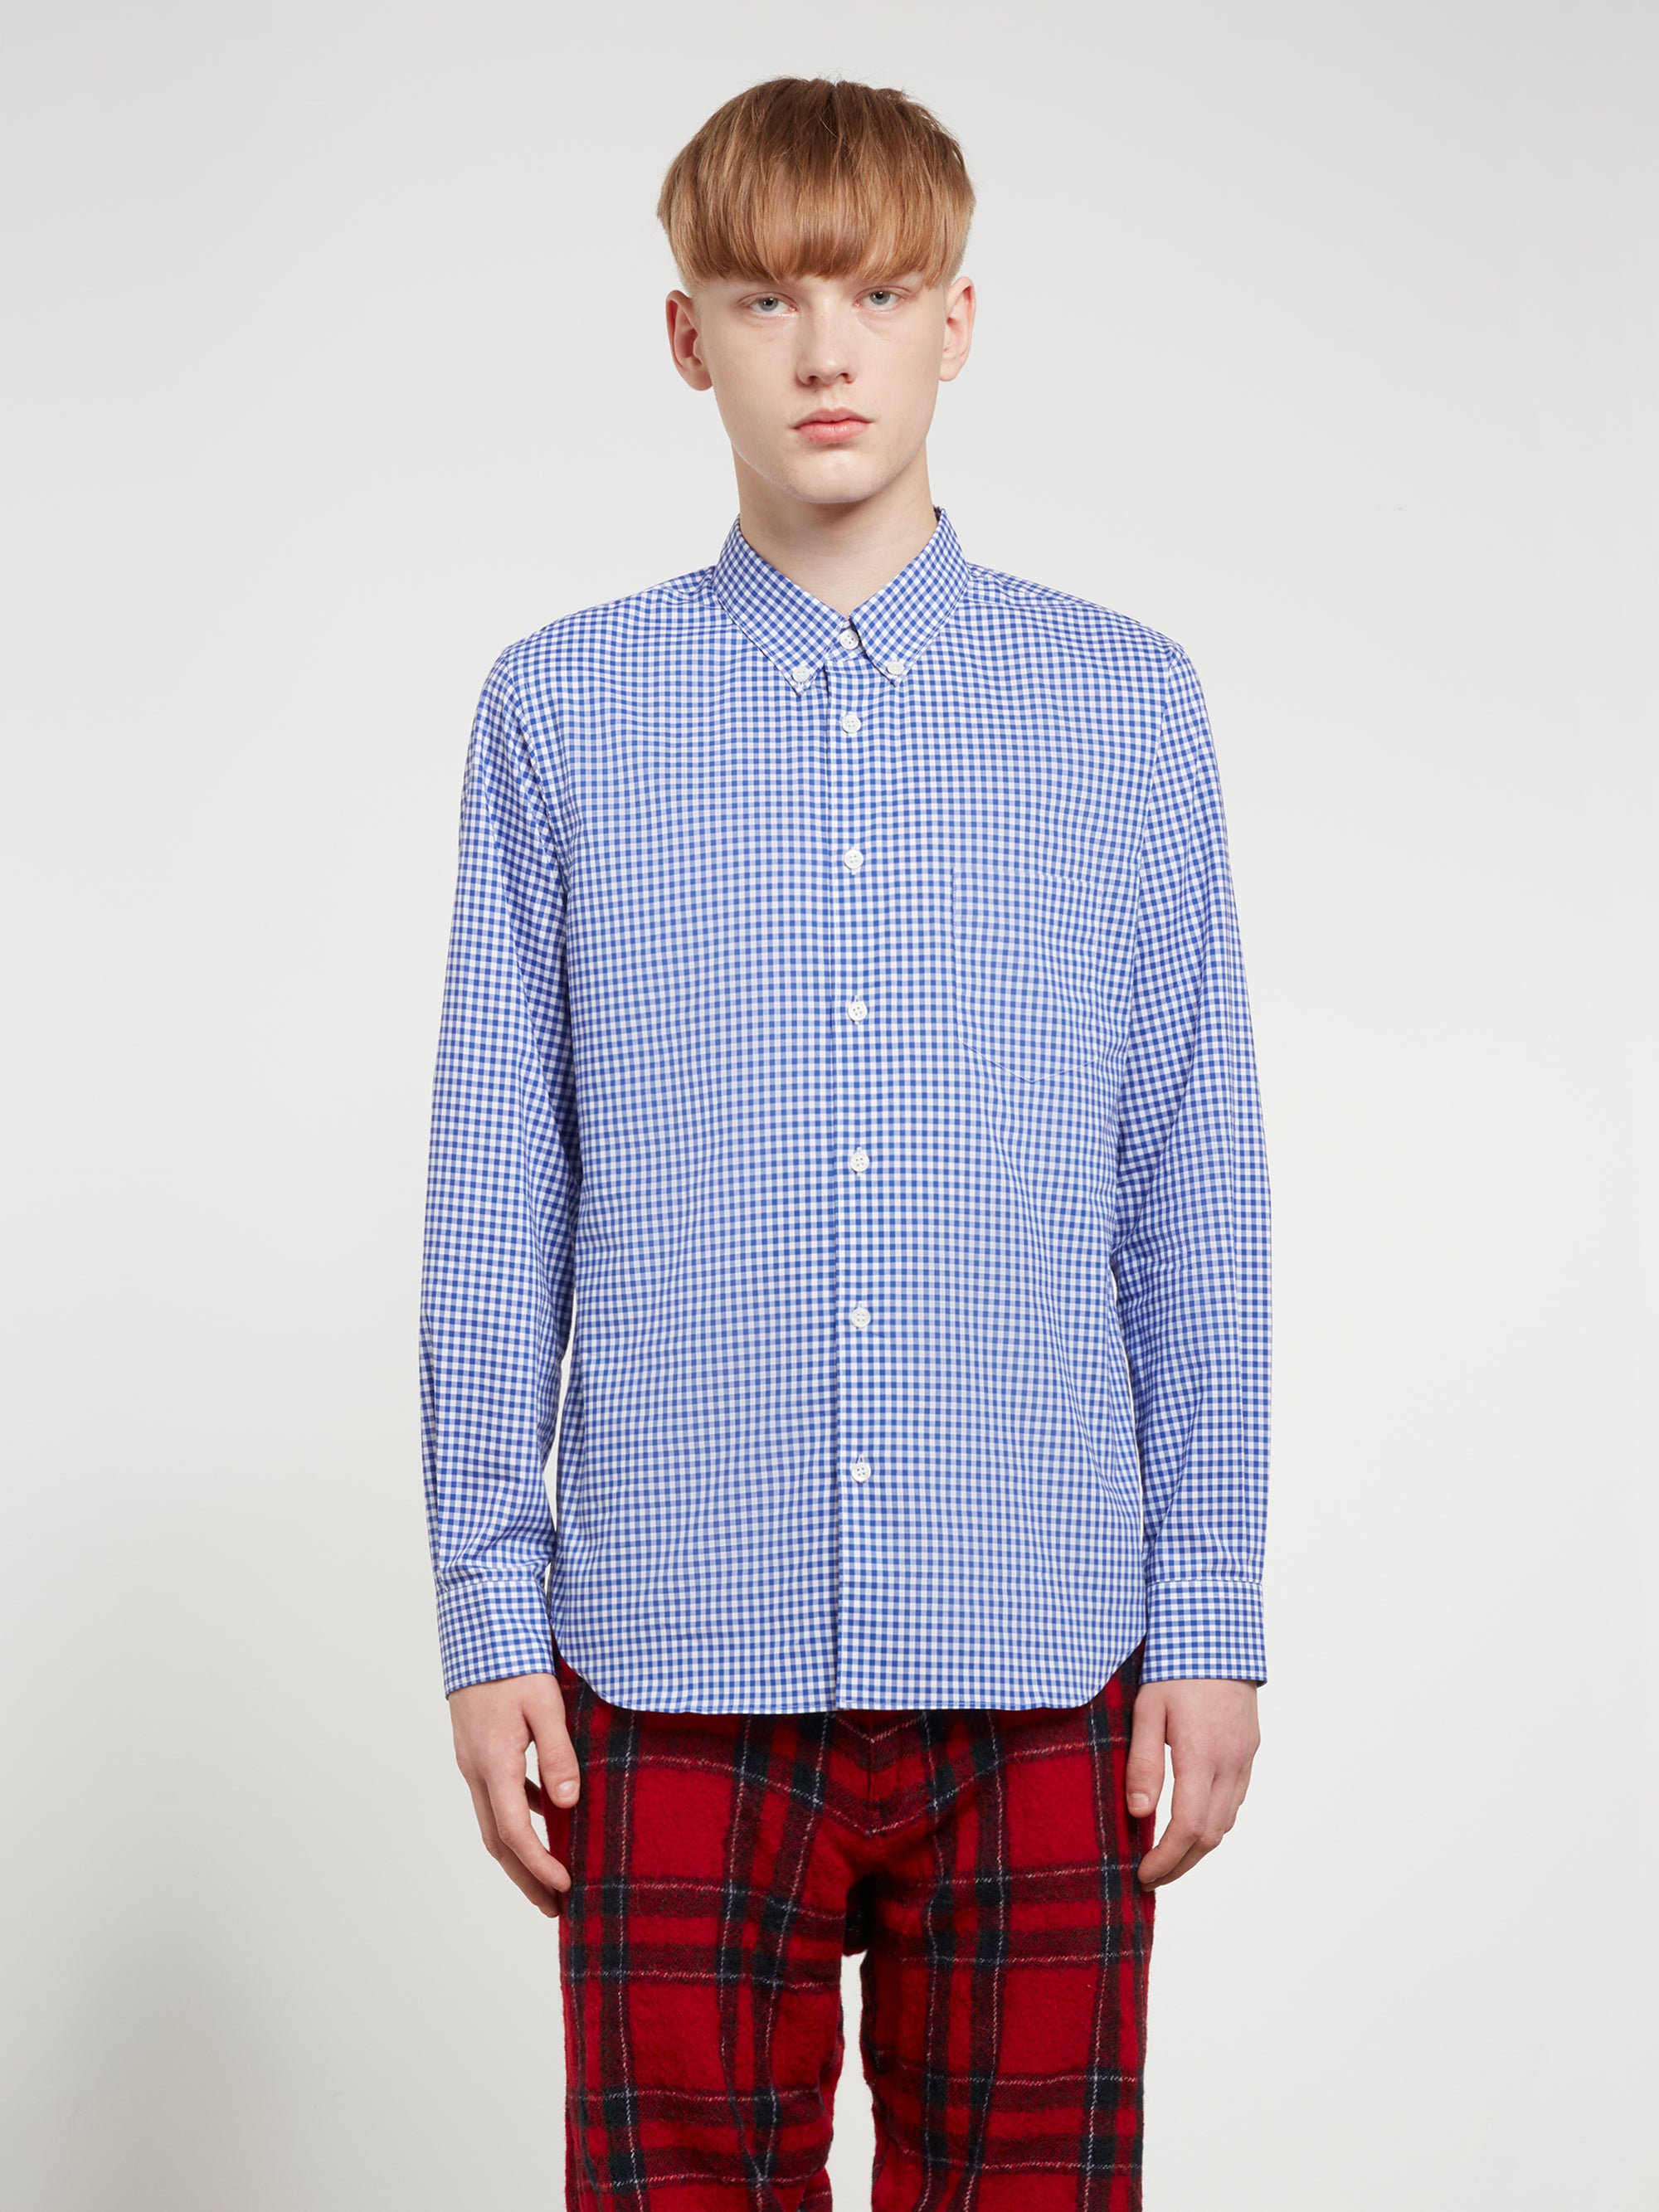 CDG Shirt Forever - Slim Fit Button-Down Checked Shirt - (Blue Gingham) view 1